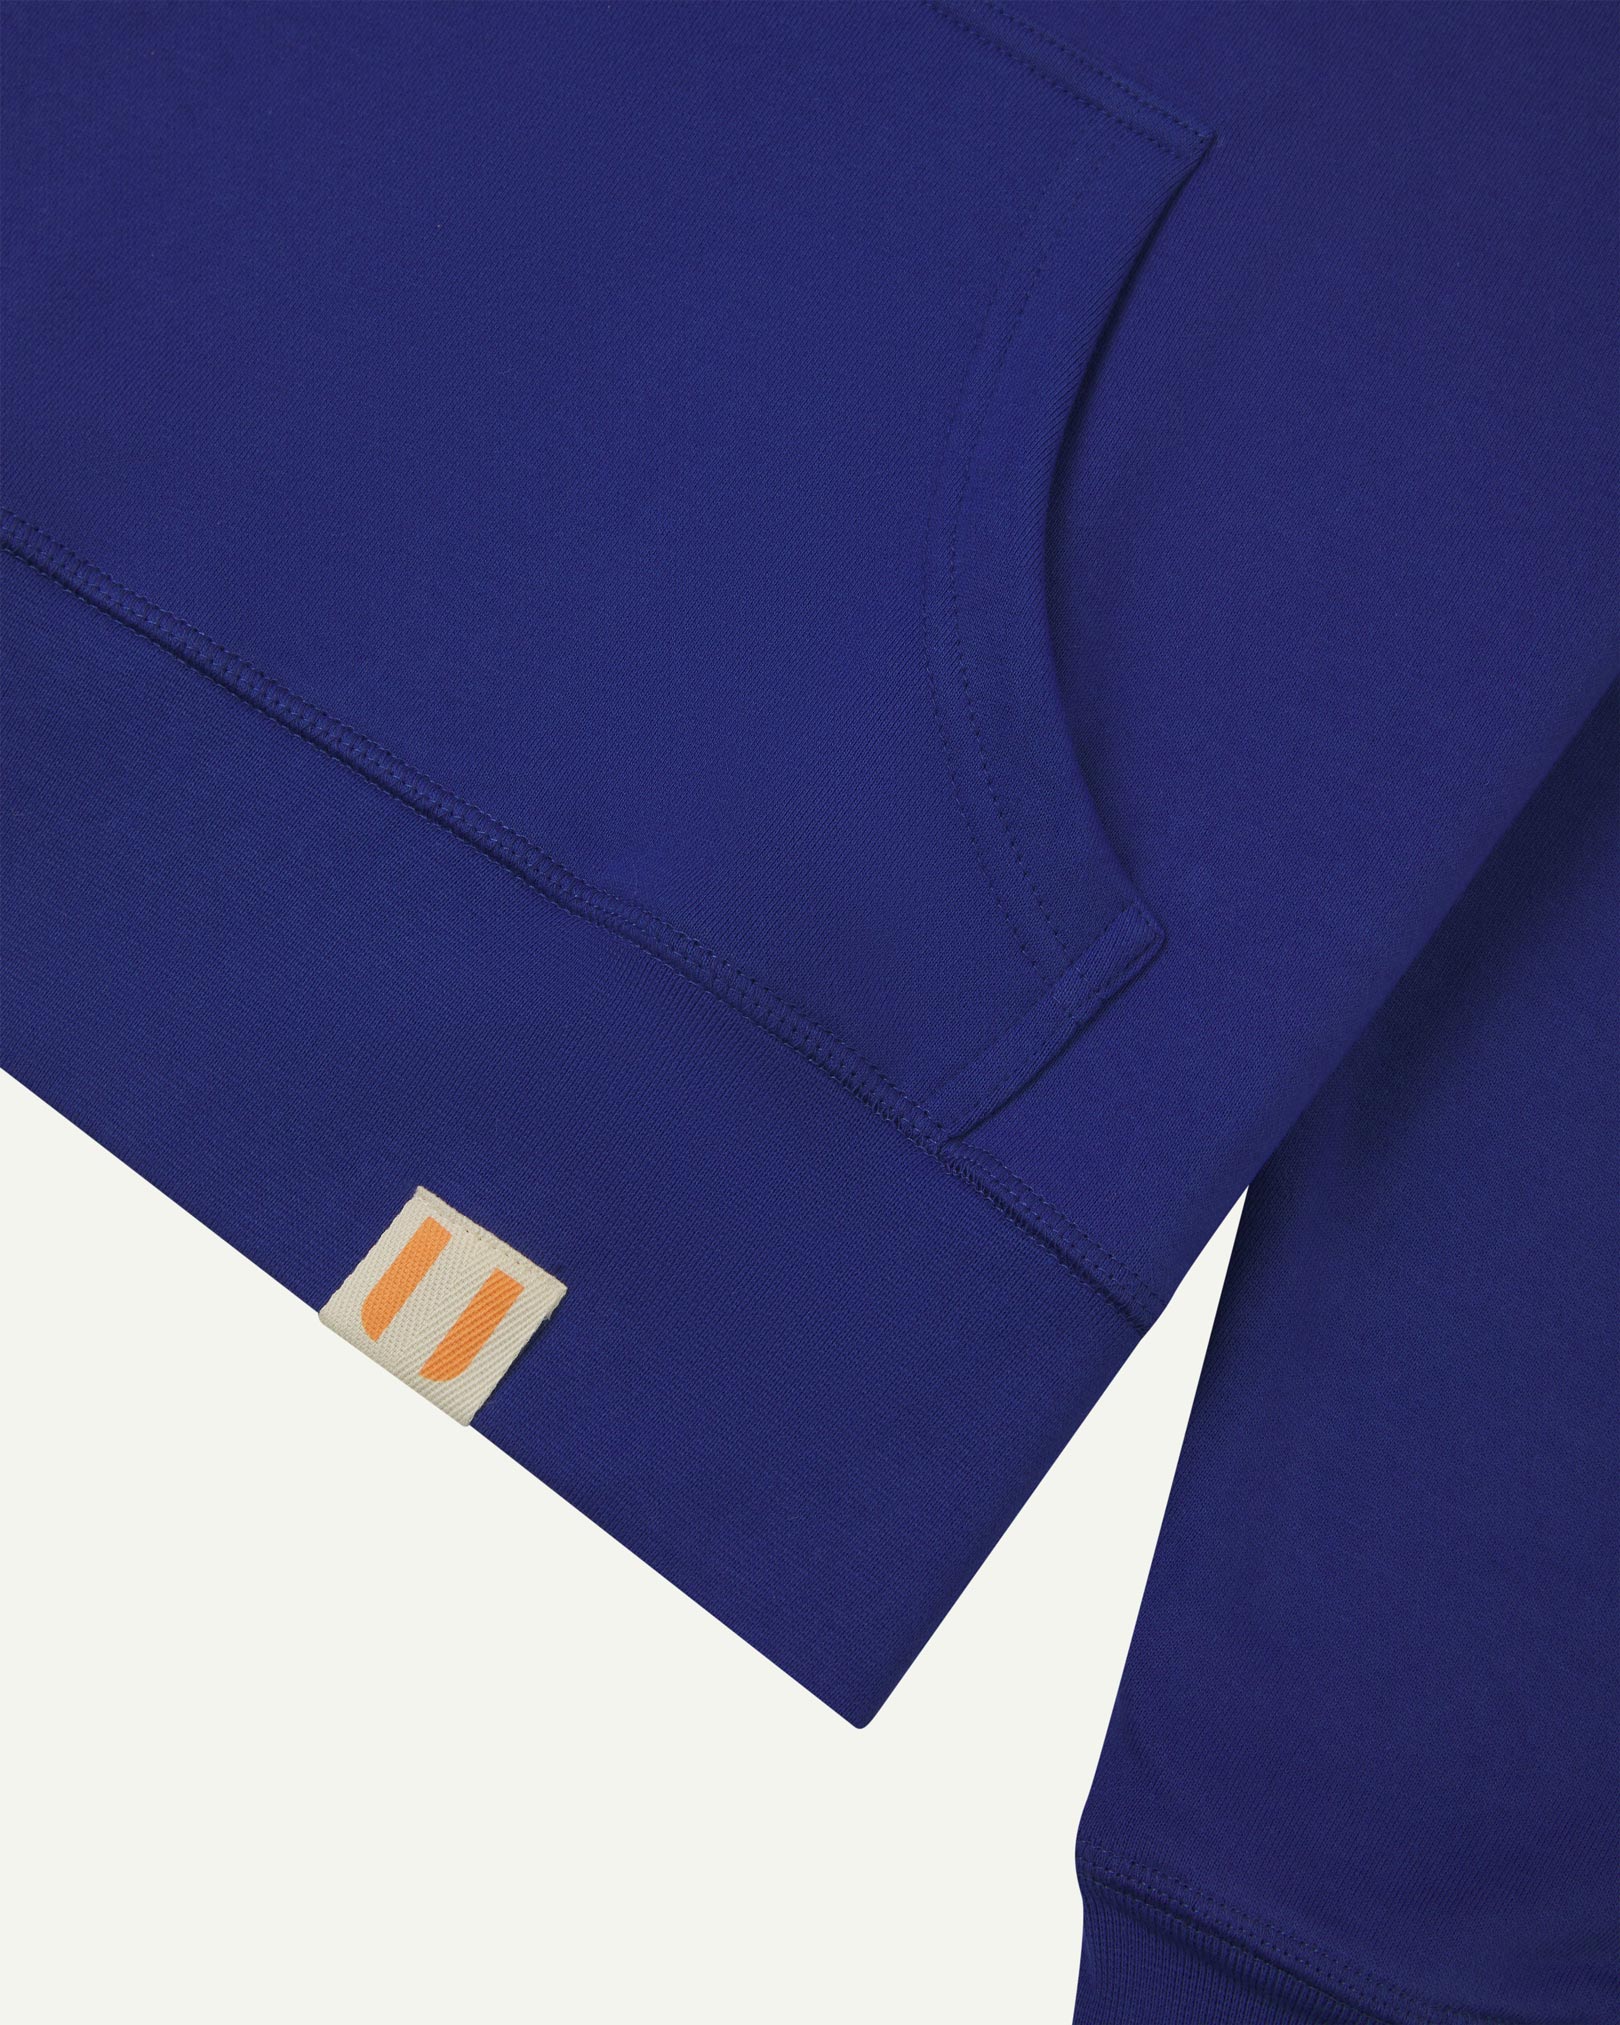 Front close view of Uskees 'ultra blue' hoodie for men with clear view of brand logo on hem and kangaroo front pocket.